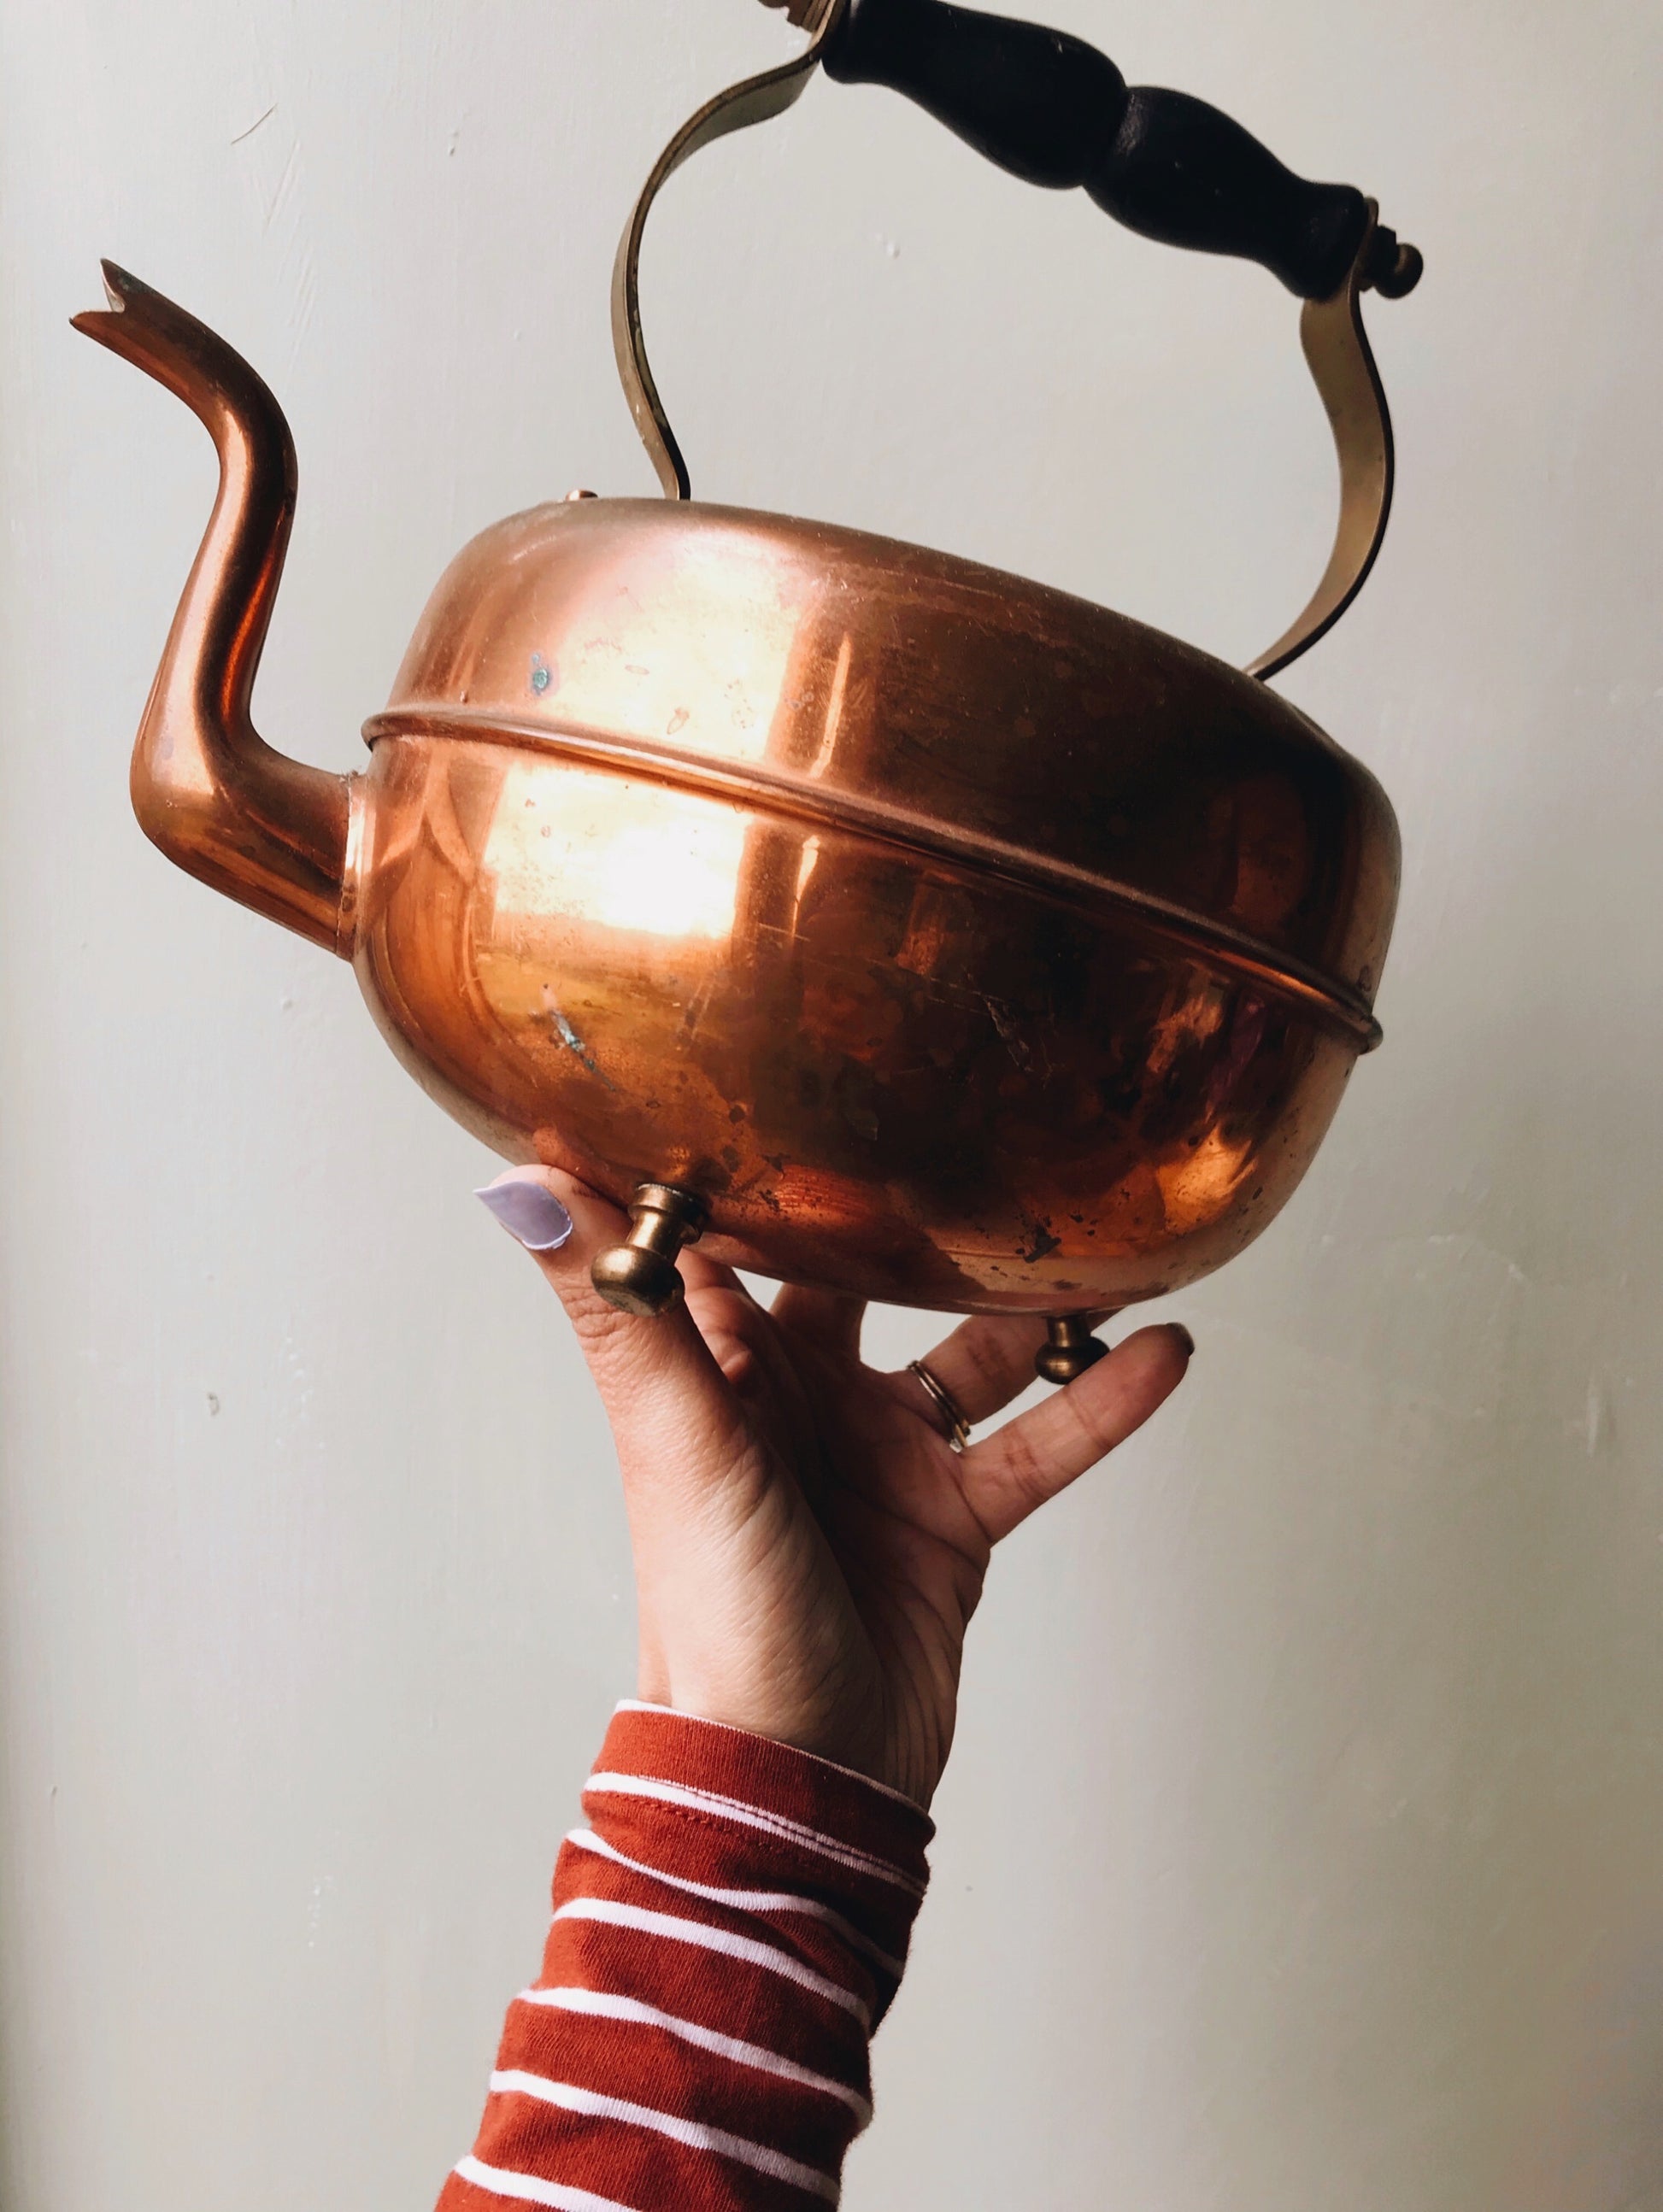 Vintage Copper & Brass Teapot with Wooden Handle (no lid) - Stone & Sage 